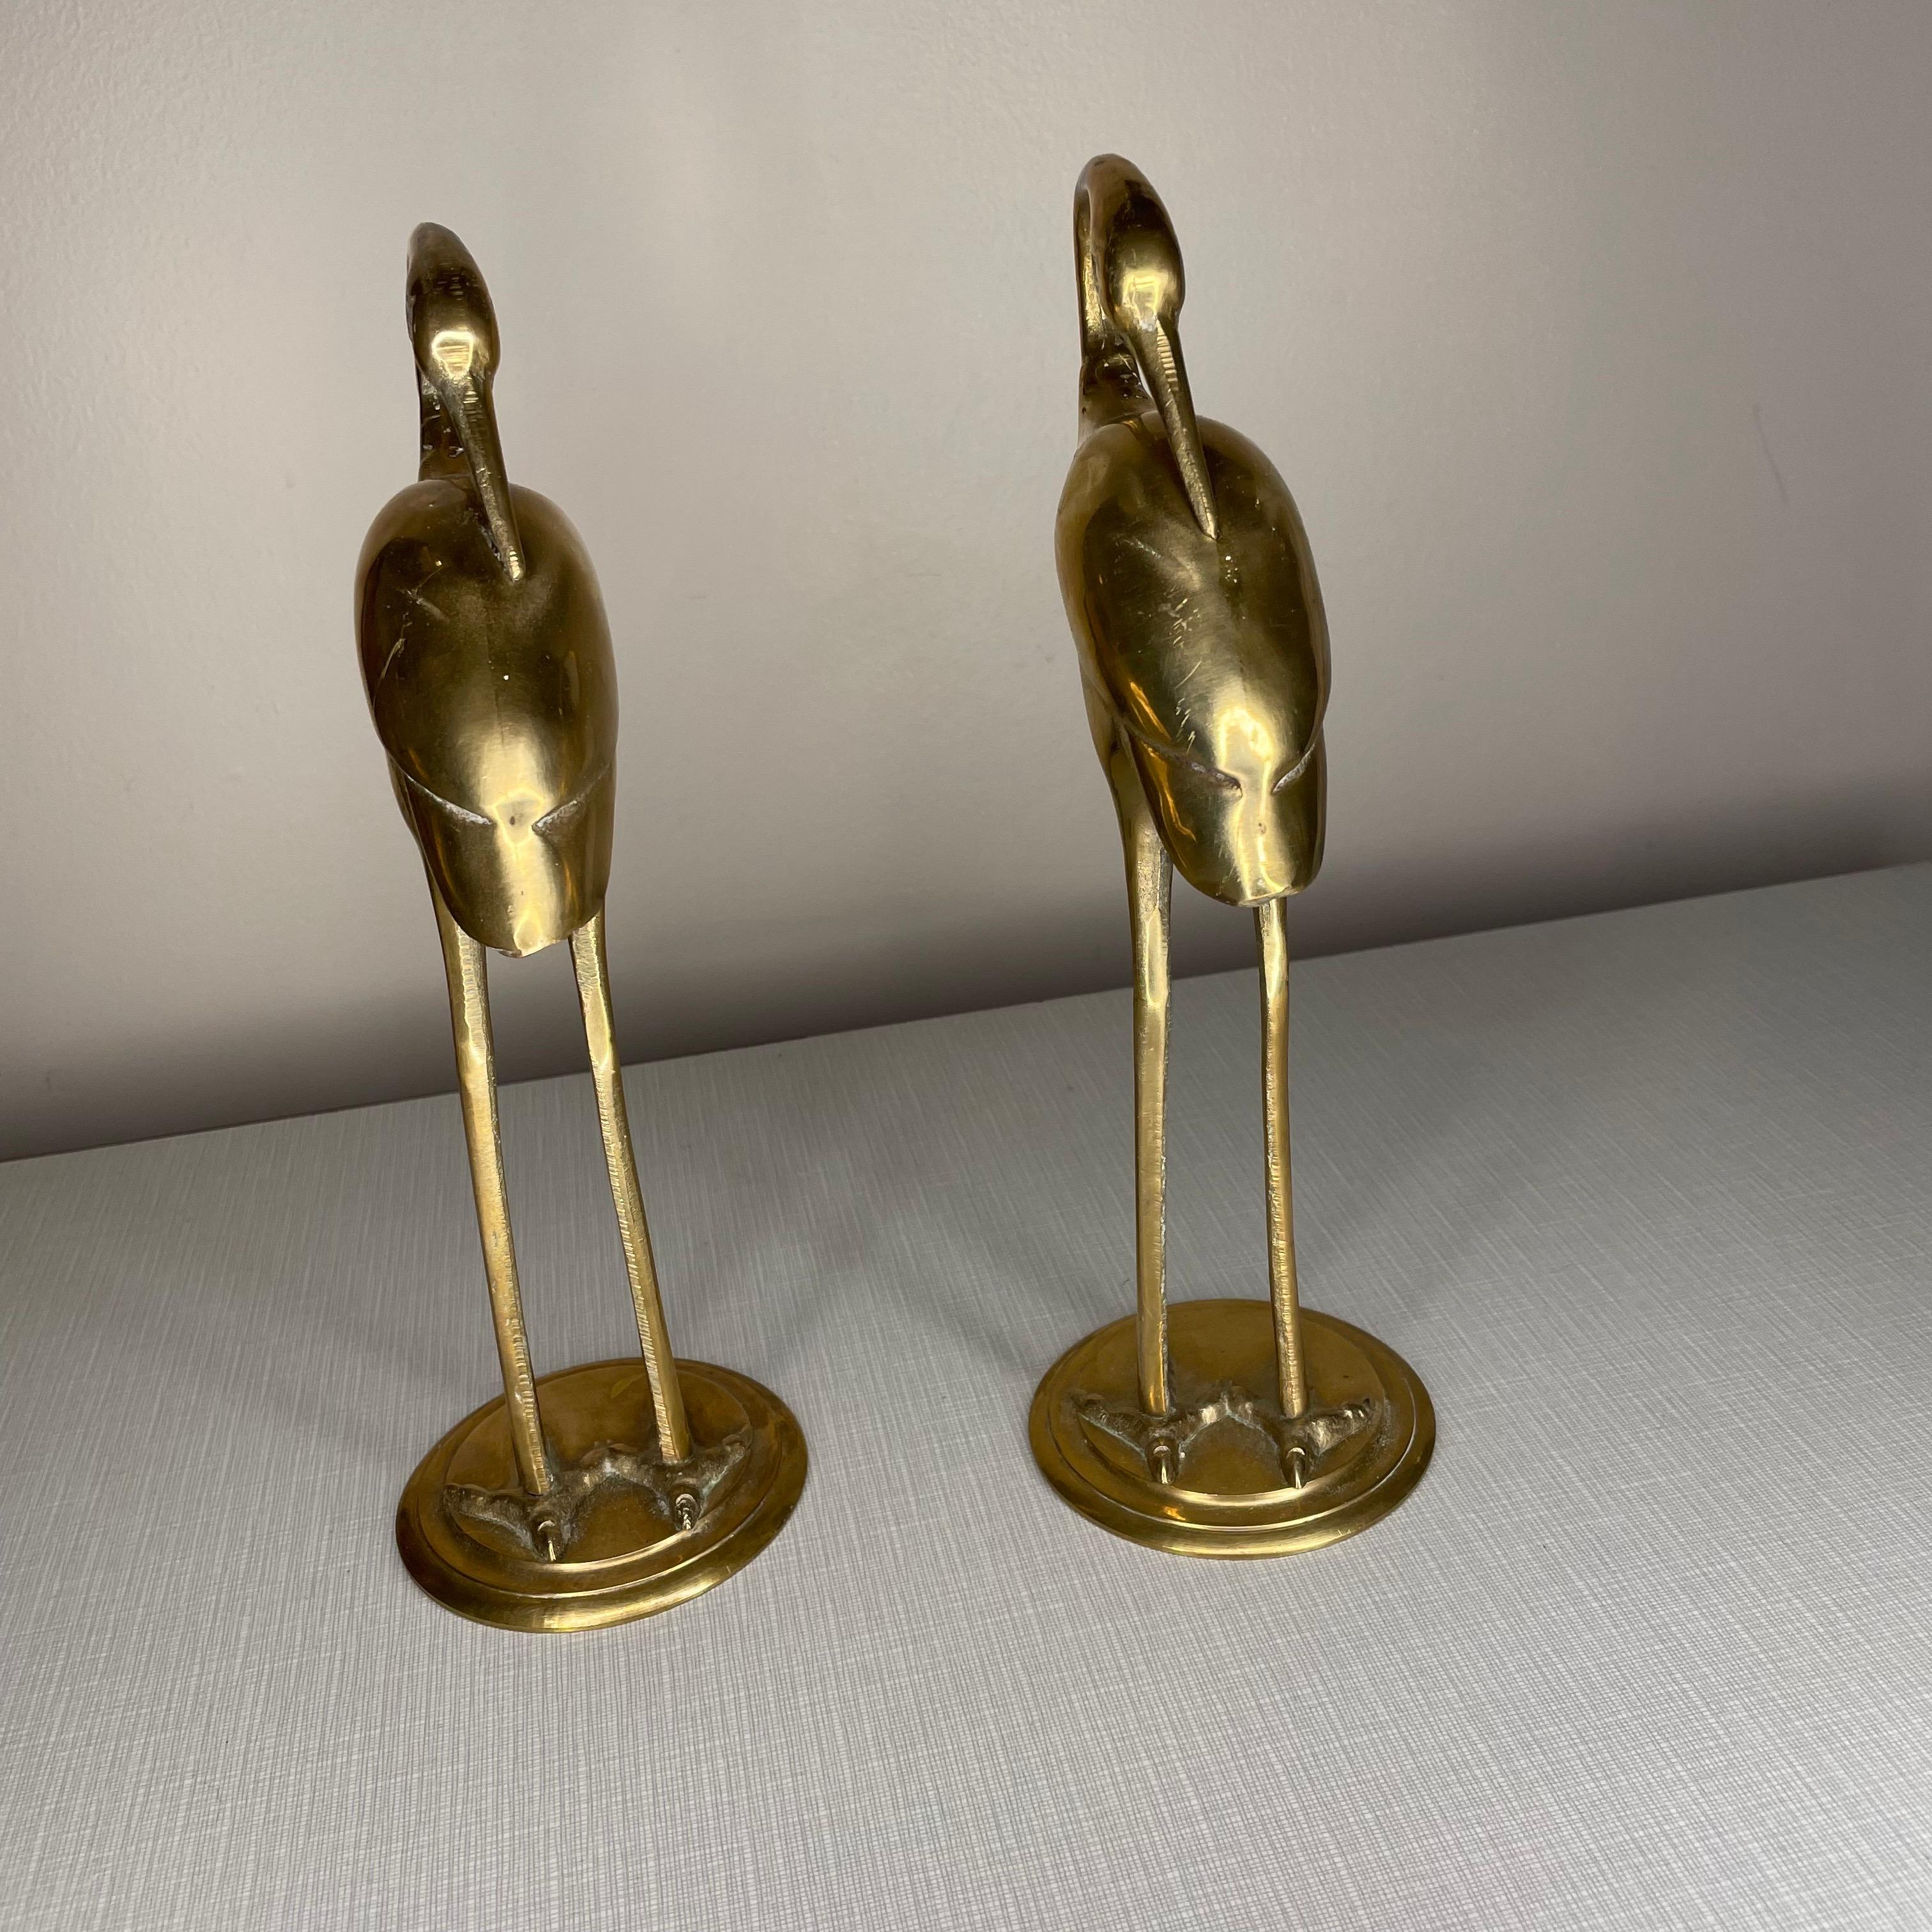 Vintage pair of brass cranes or egrets. Both are in exceptional condition. Perfectly matching. Would look great on a bookshelf or to add to your current brass collection!